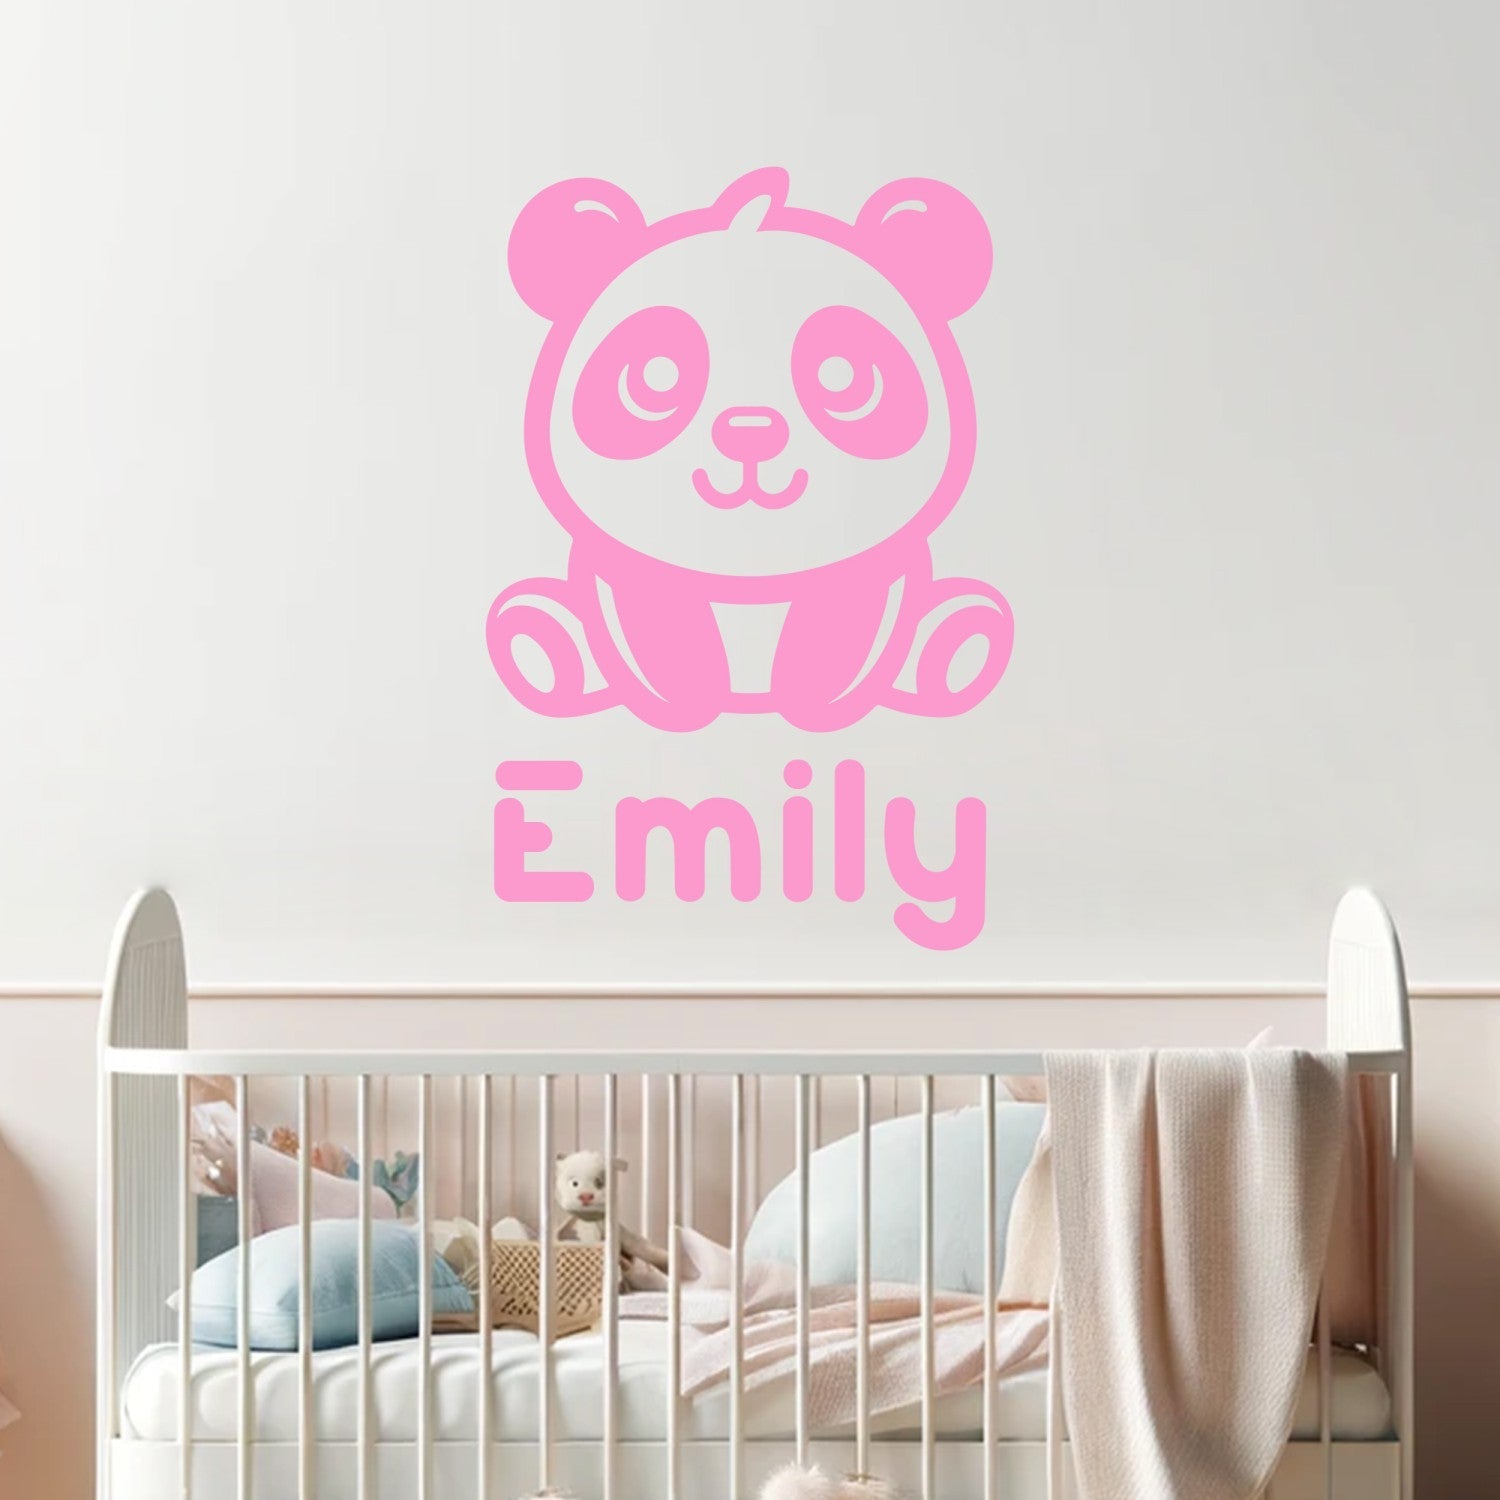 Racoon Stickers for Nursery Decor - Personalized Name Decals for Baby Room - Customized Wall Decals with Forest Animals - Racoon Nursery Wall Decal